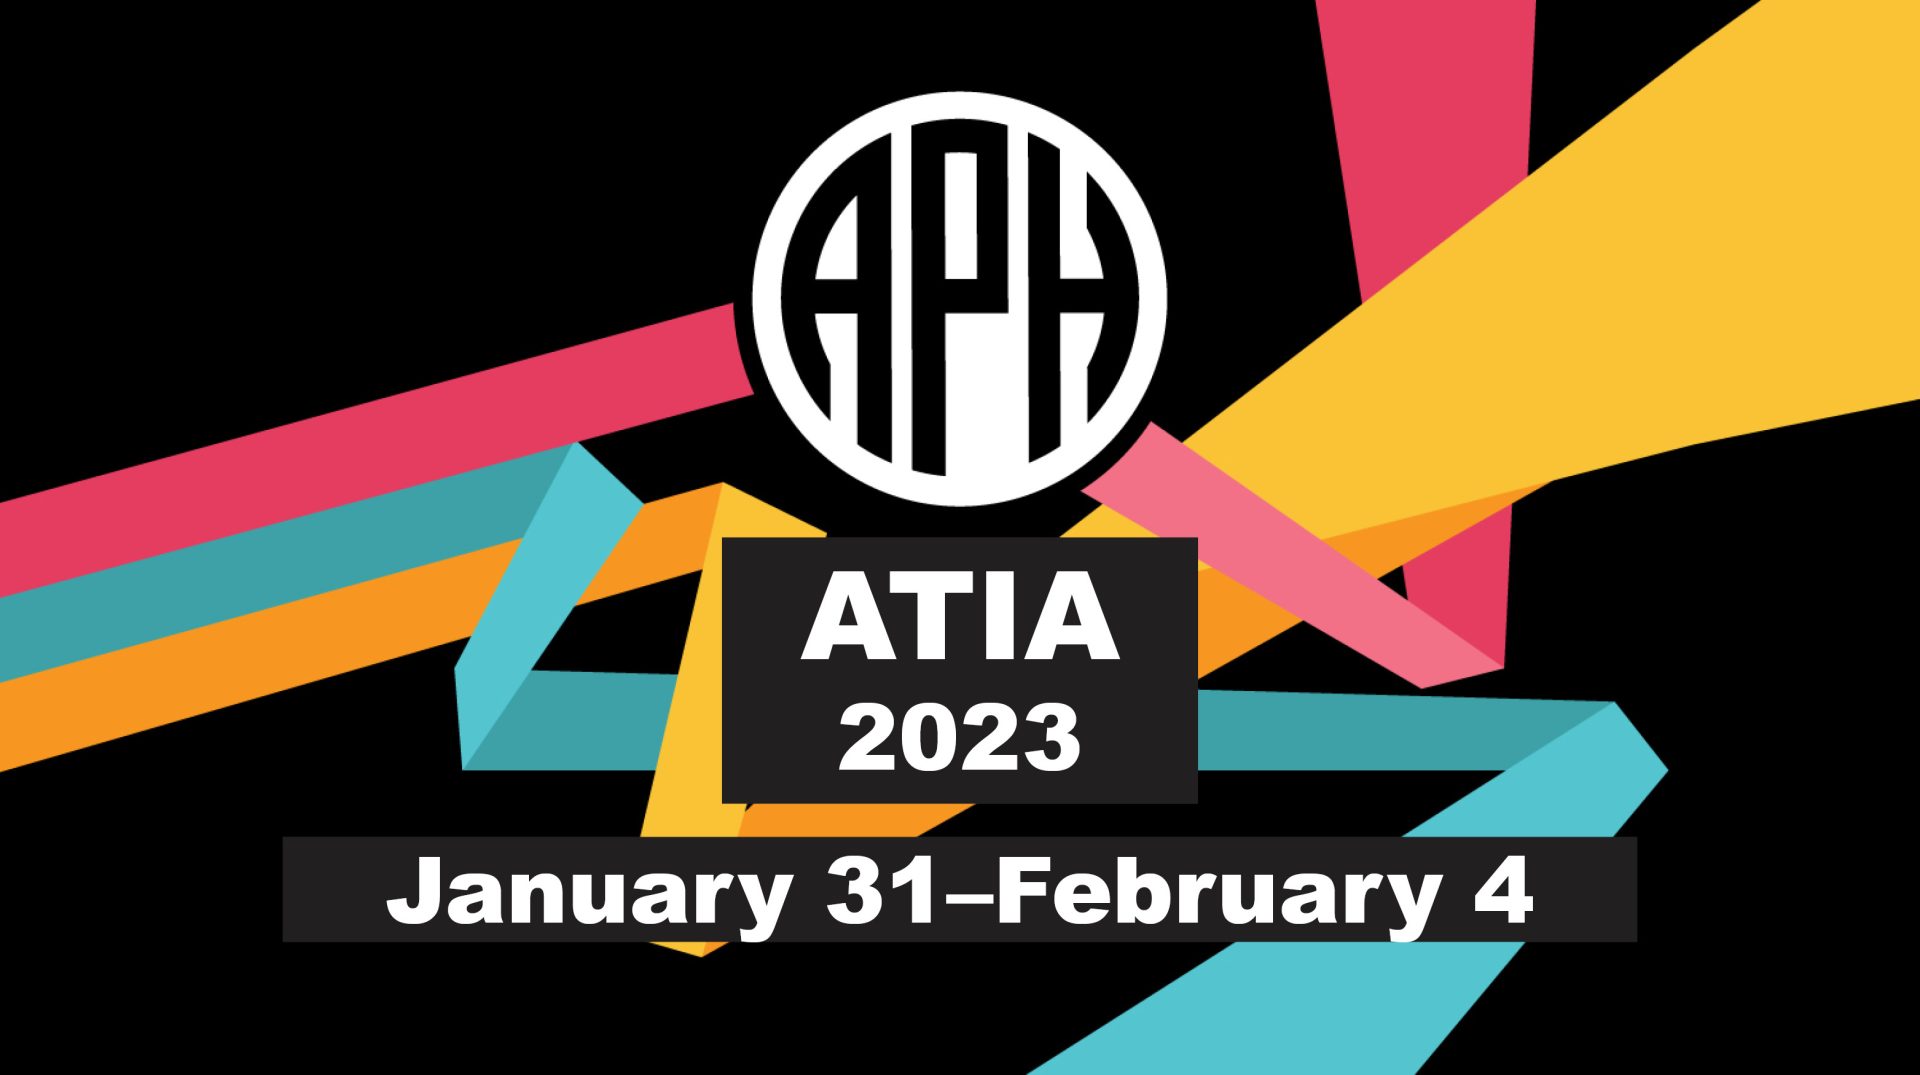 APH event banner. Three parallel bars in the APH brand colors of pomegranate, teal, and gold diverge and zigzag dynamically behind the APH logo. Text reads: ATIA 2023, January 31 - February 4.